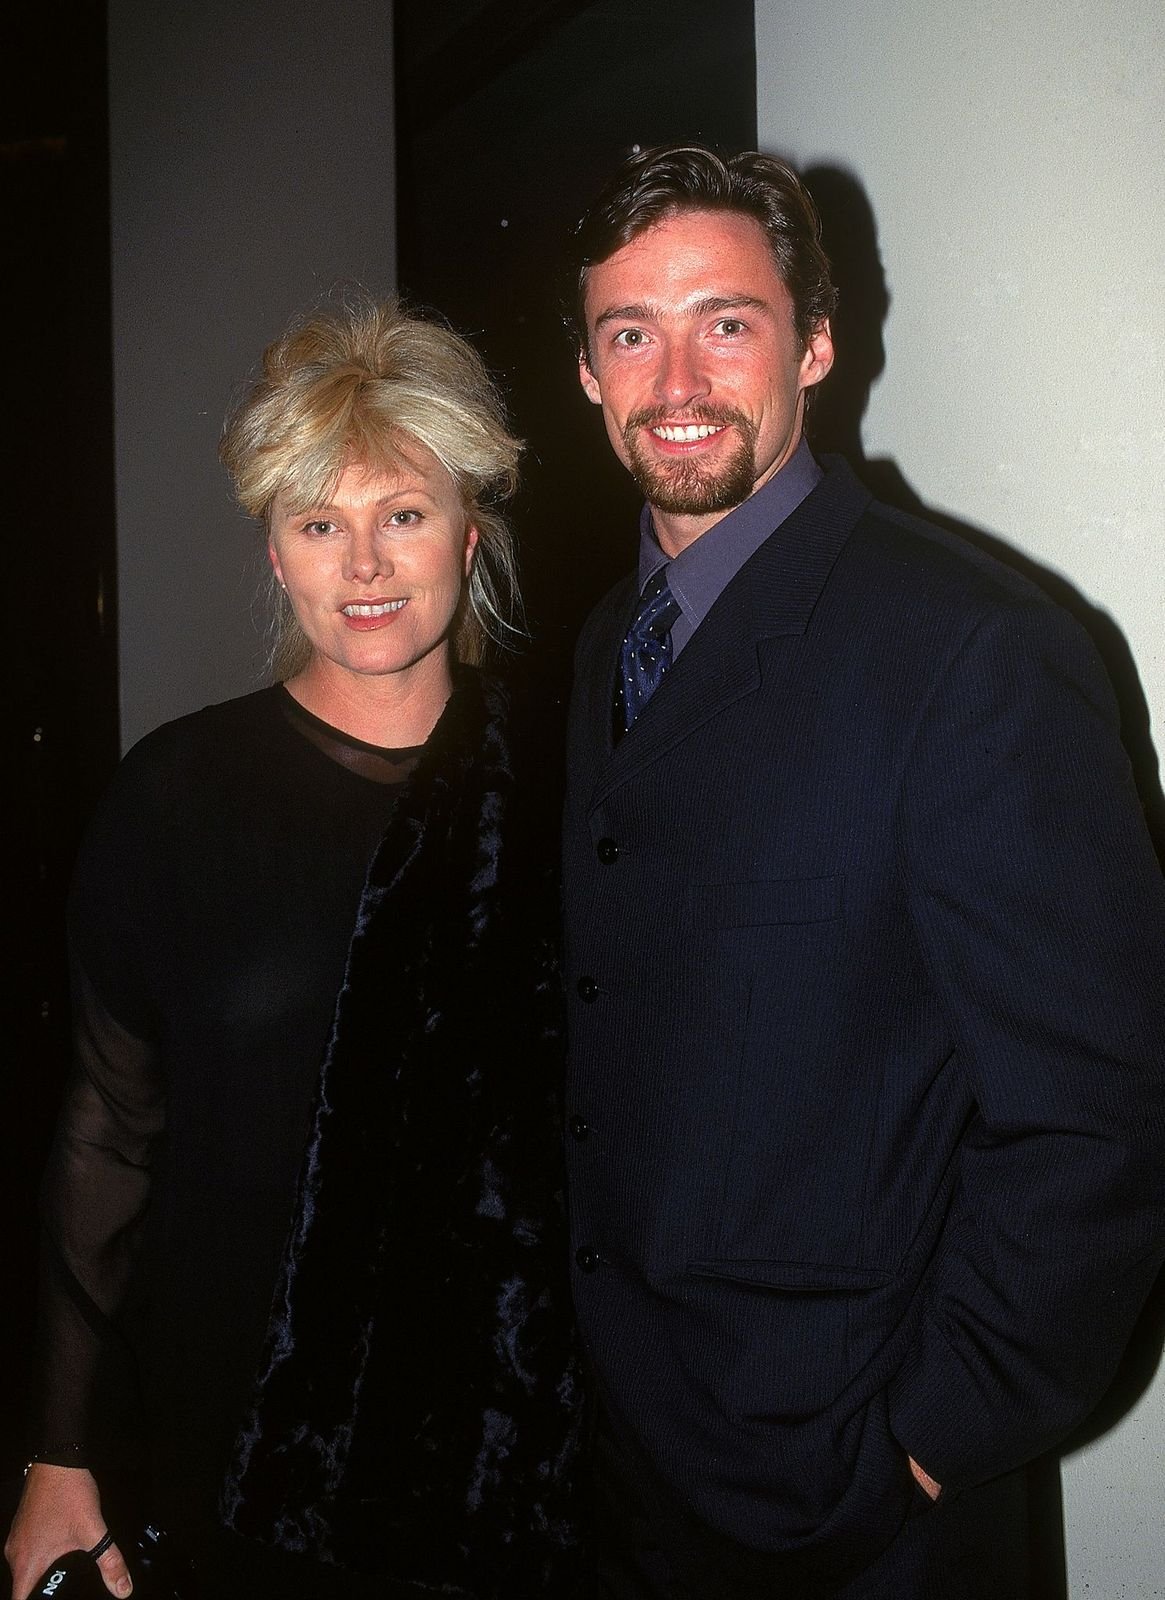 Deborra-Lee Furness and Hugh Jackman at the Variety Club Heart Awards on July 18, 1997, in Sydney, Australia | Photo: Patrick Riviere/Getty Images